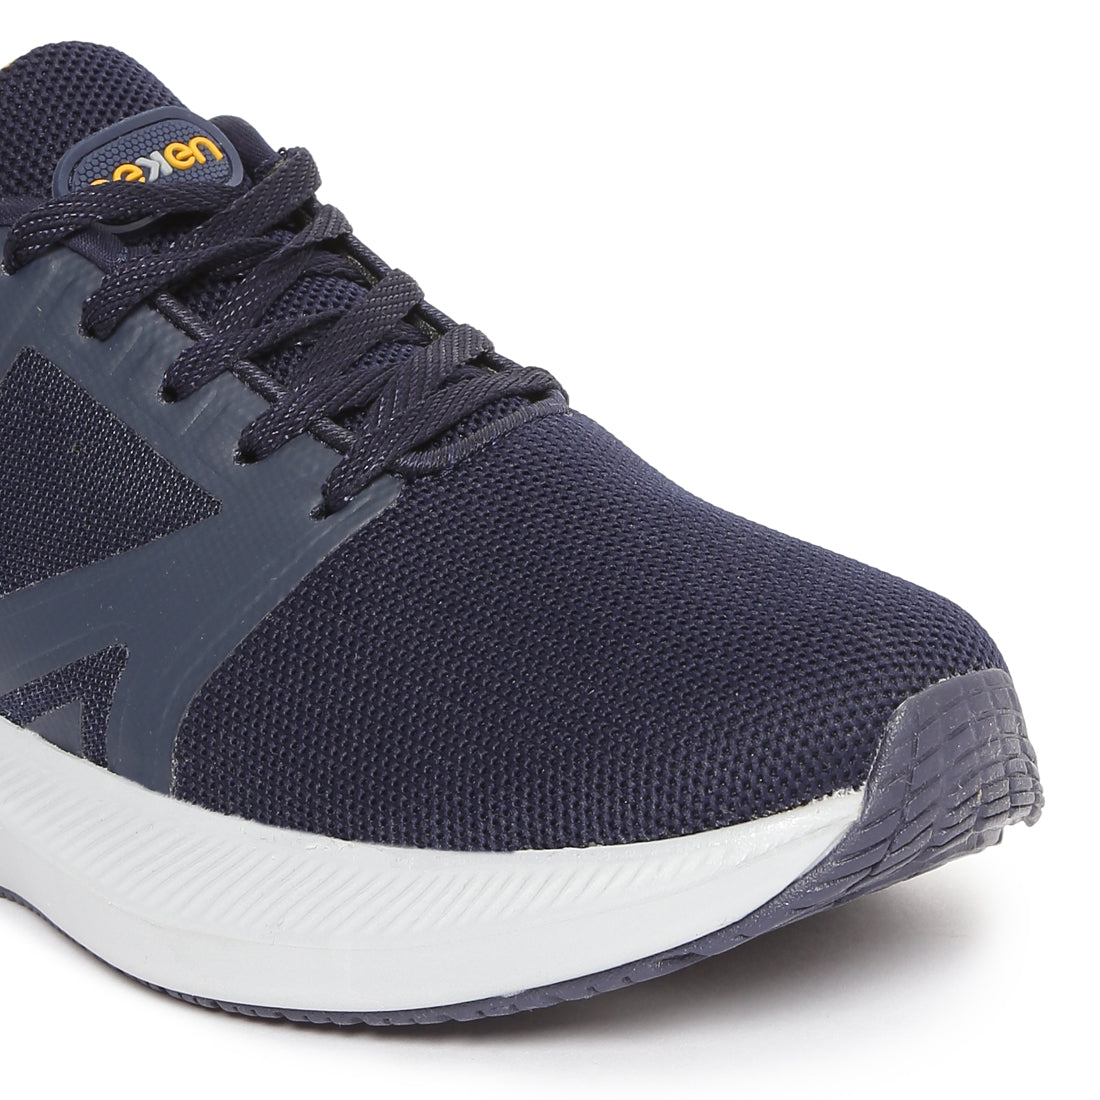 Eeken ESHGIA124 Navy Blue And Mustard Yellow Athleisure Shoes For Men